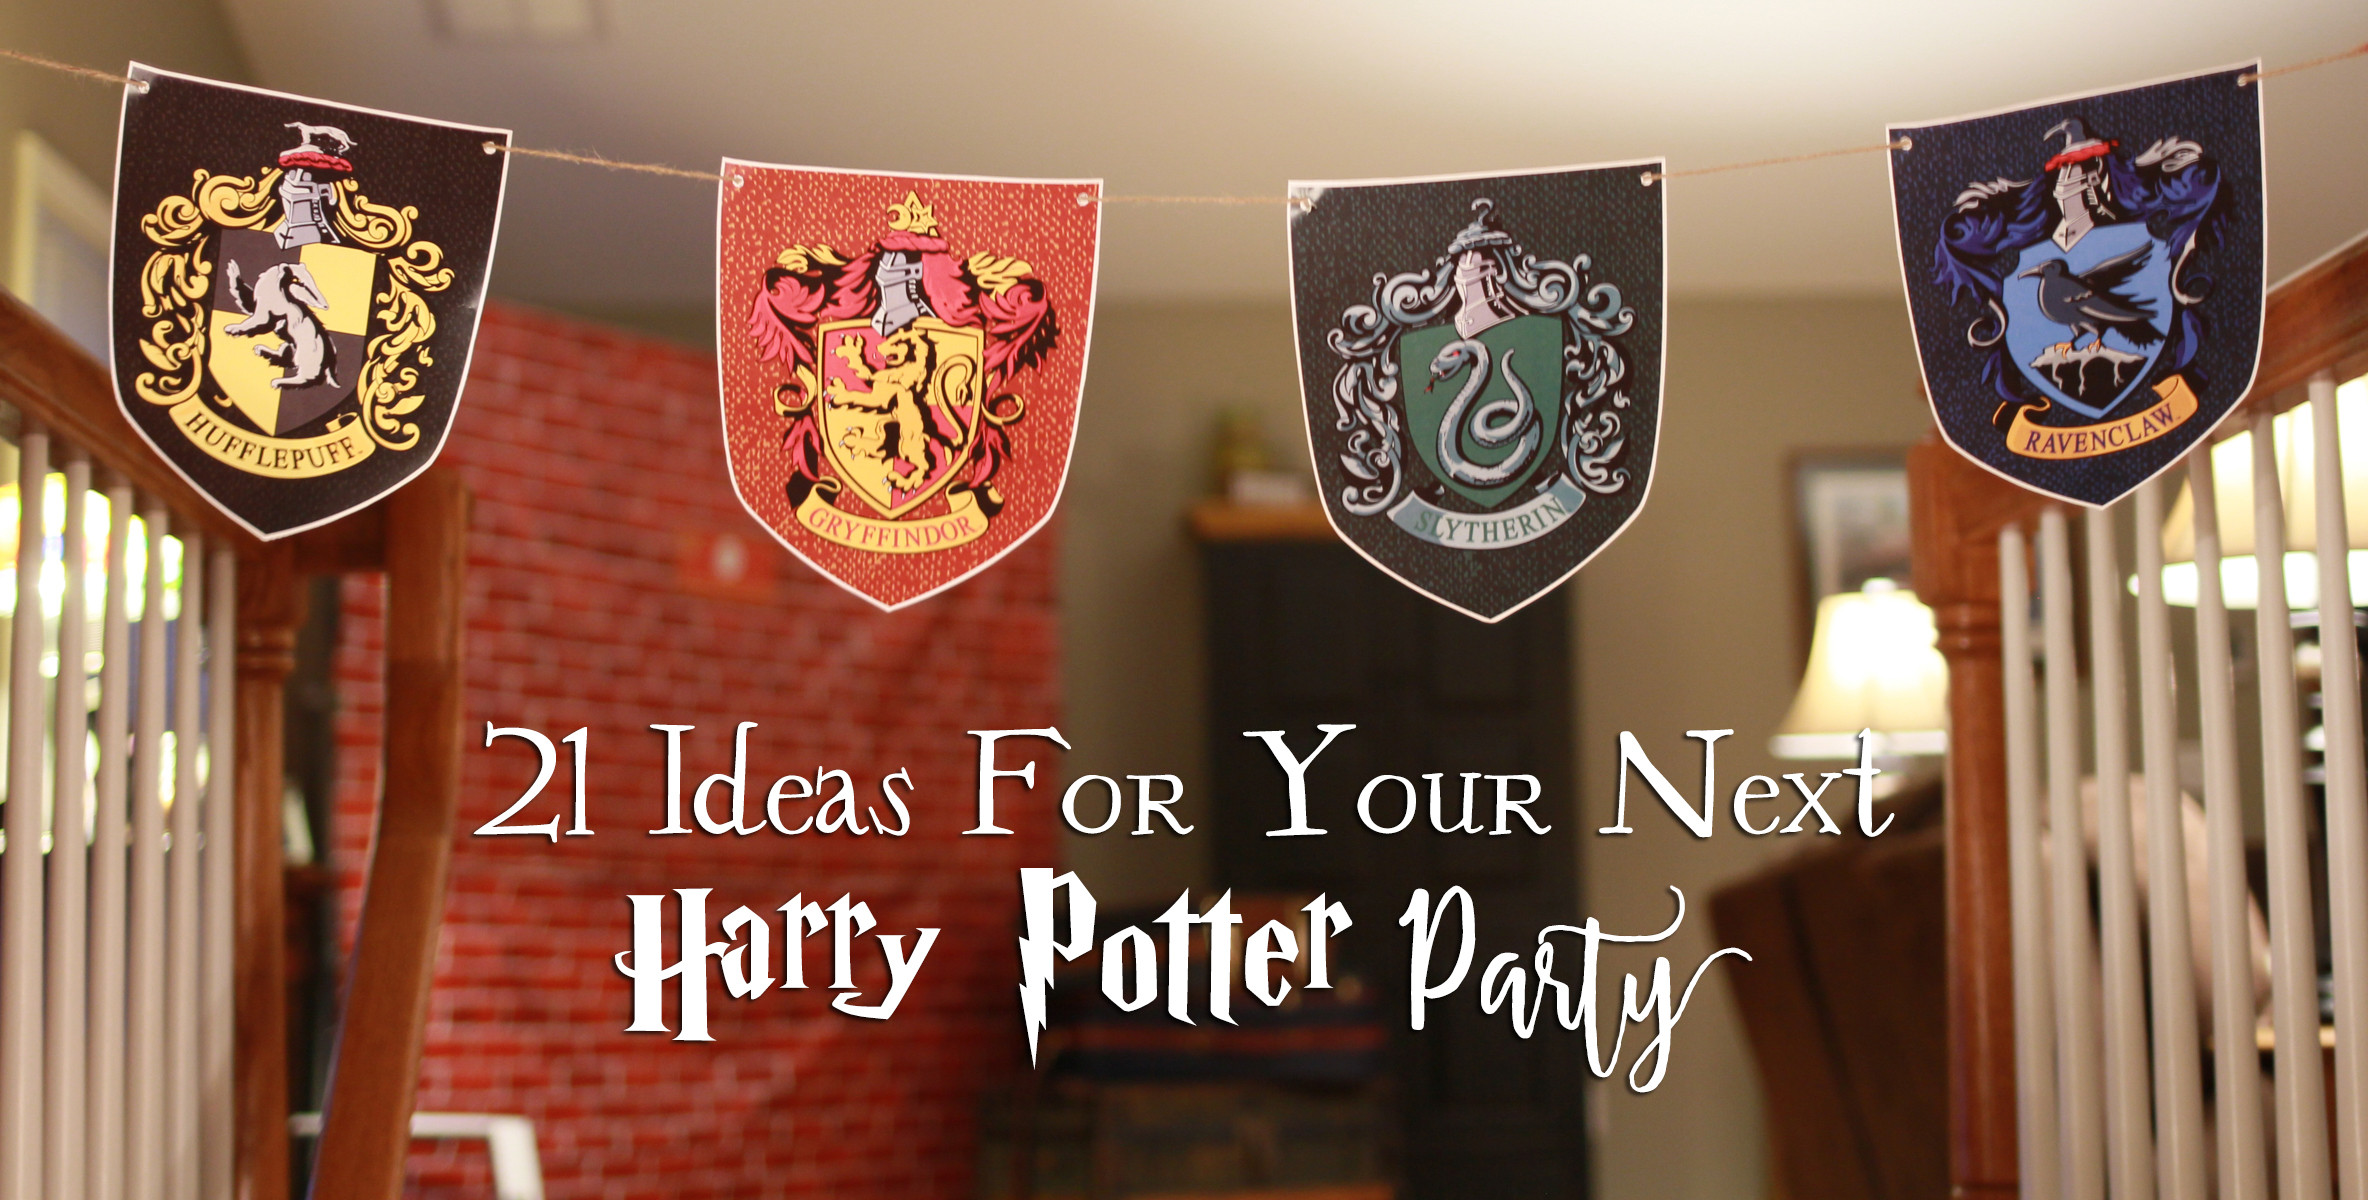 Harry Potter Decorations DIY
 21 DIY Ideas for Your Next Harry Potter Party Another